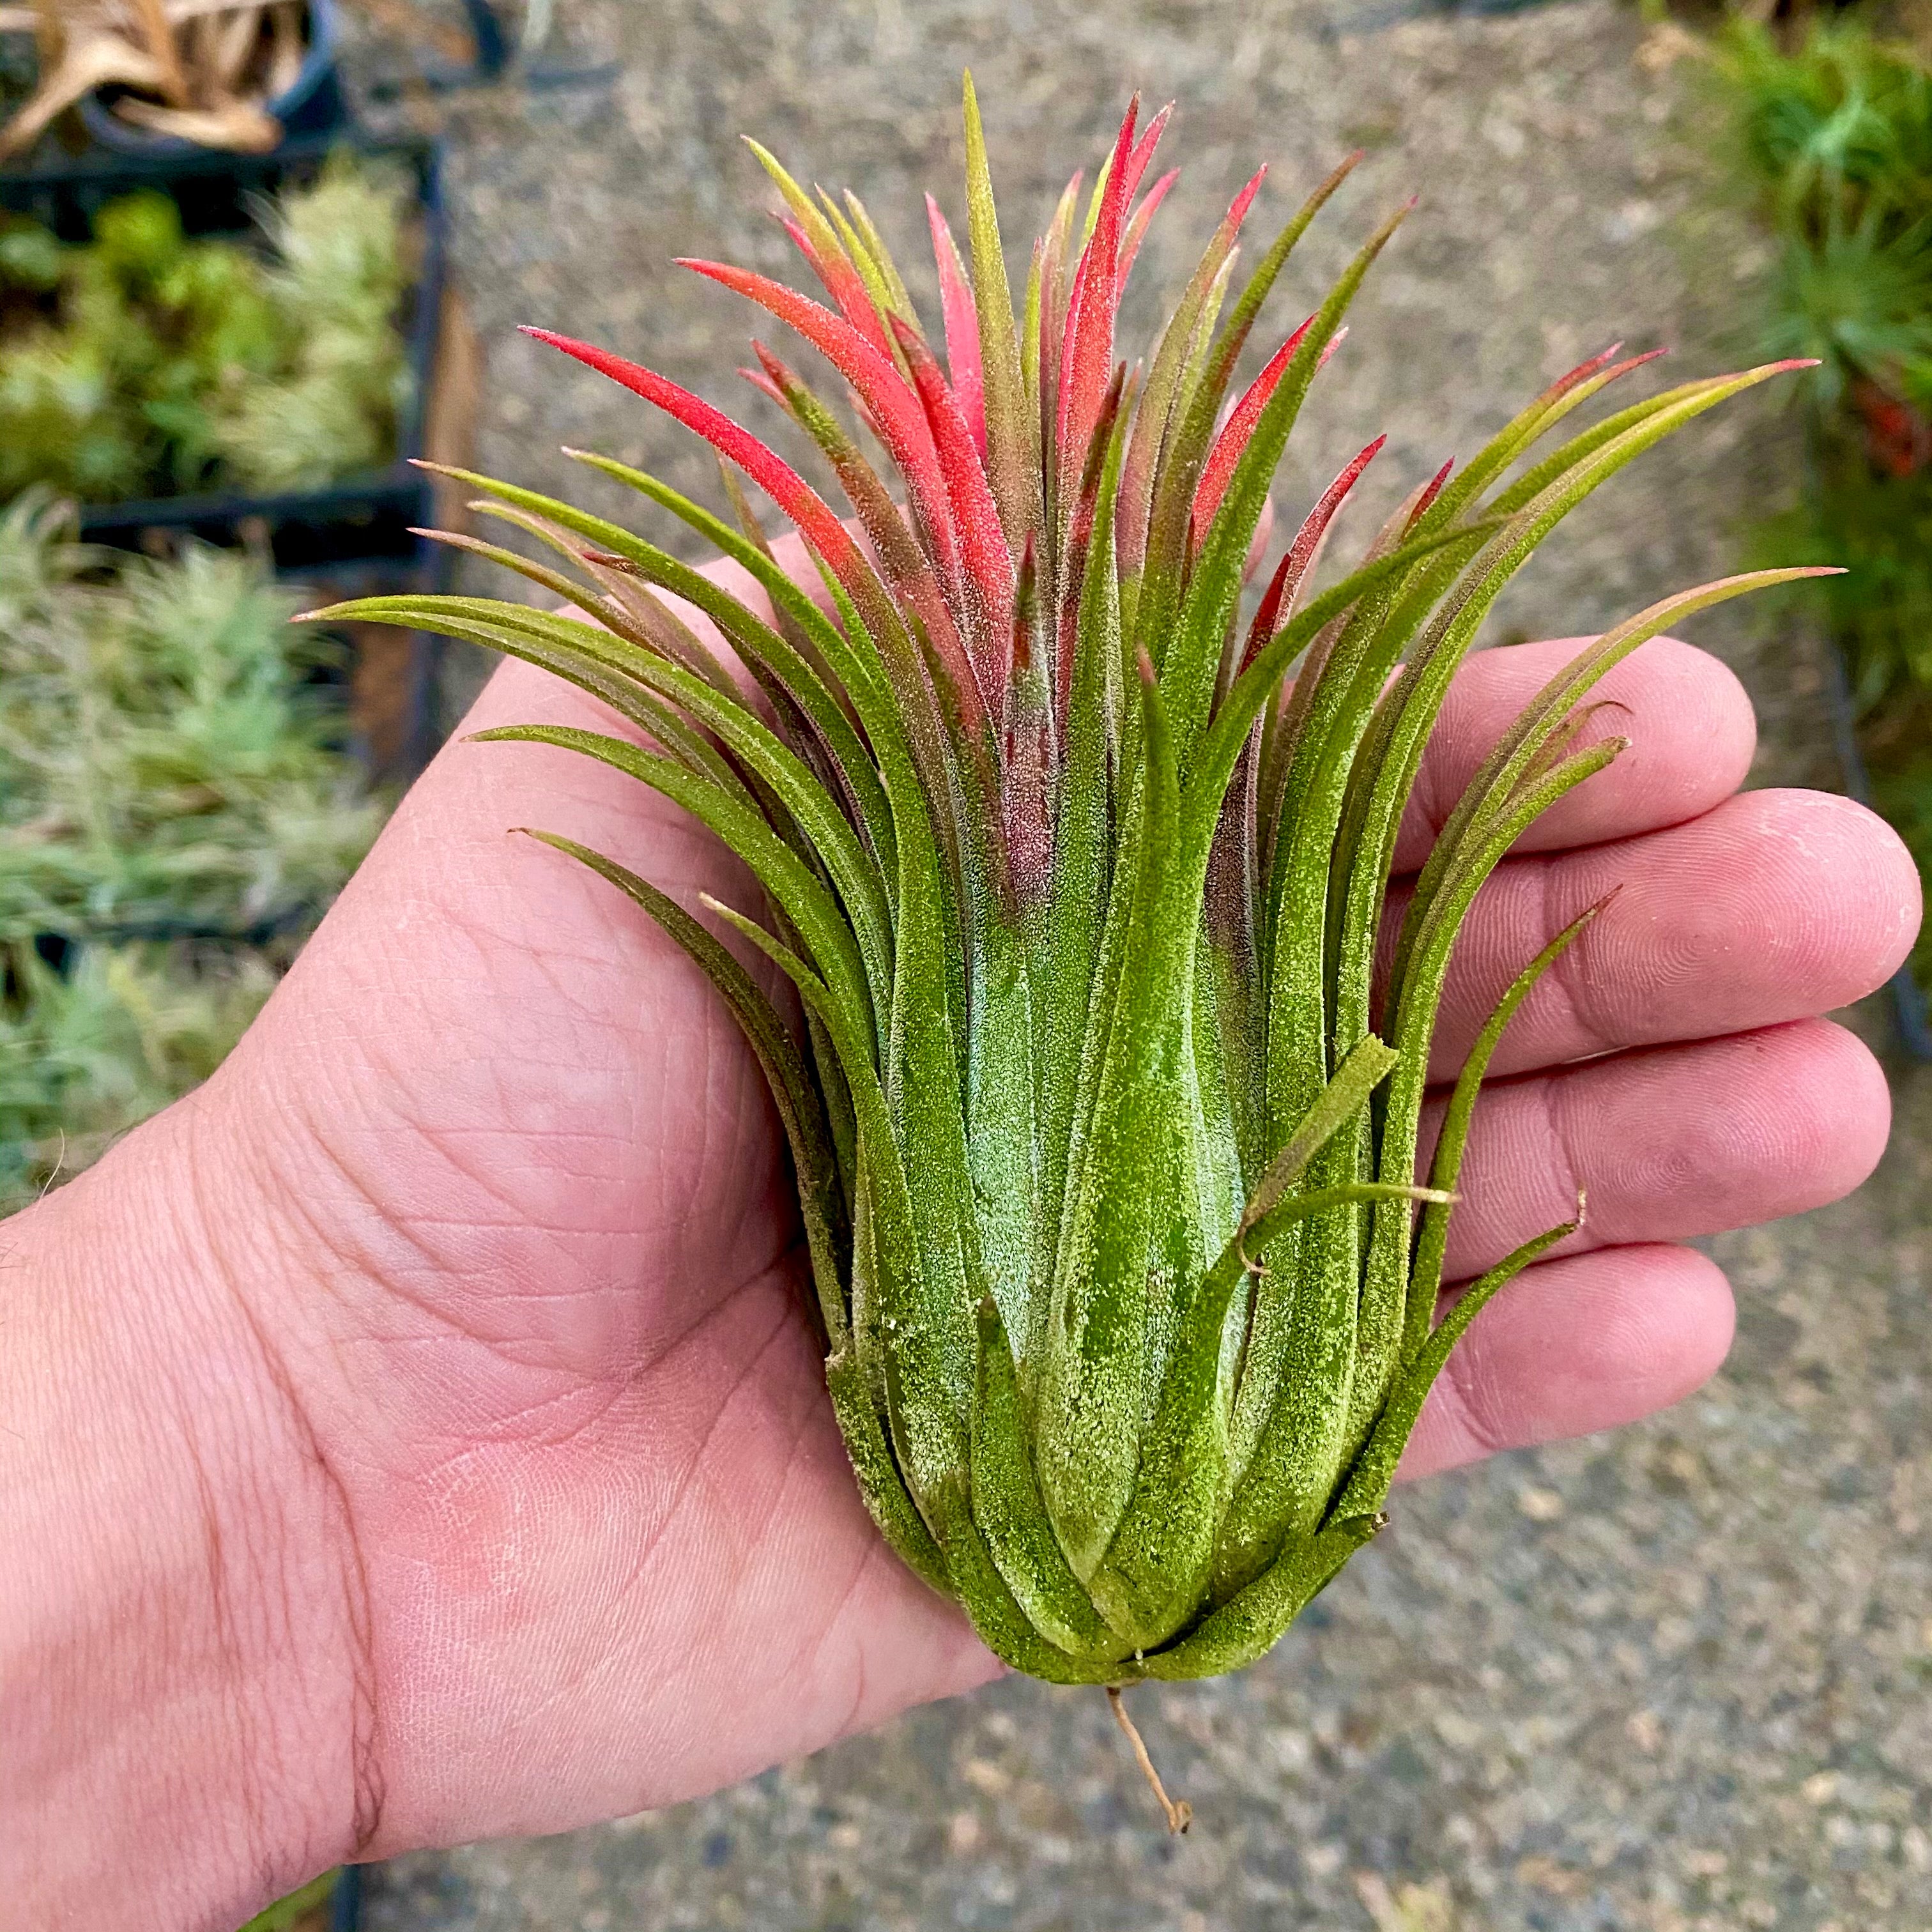 Tillandsia Ionantha Curly Giant Air Plant Large Giant